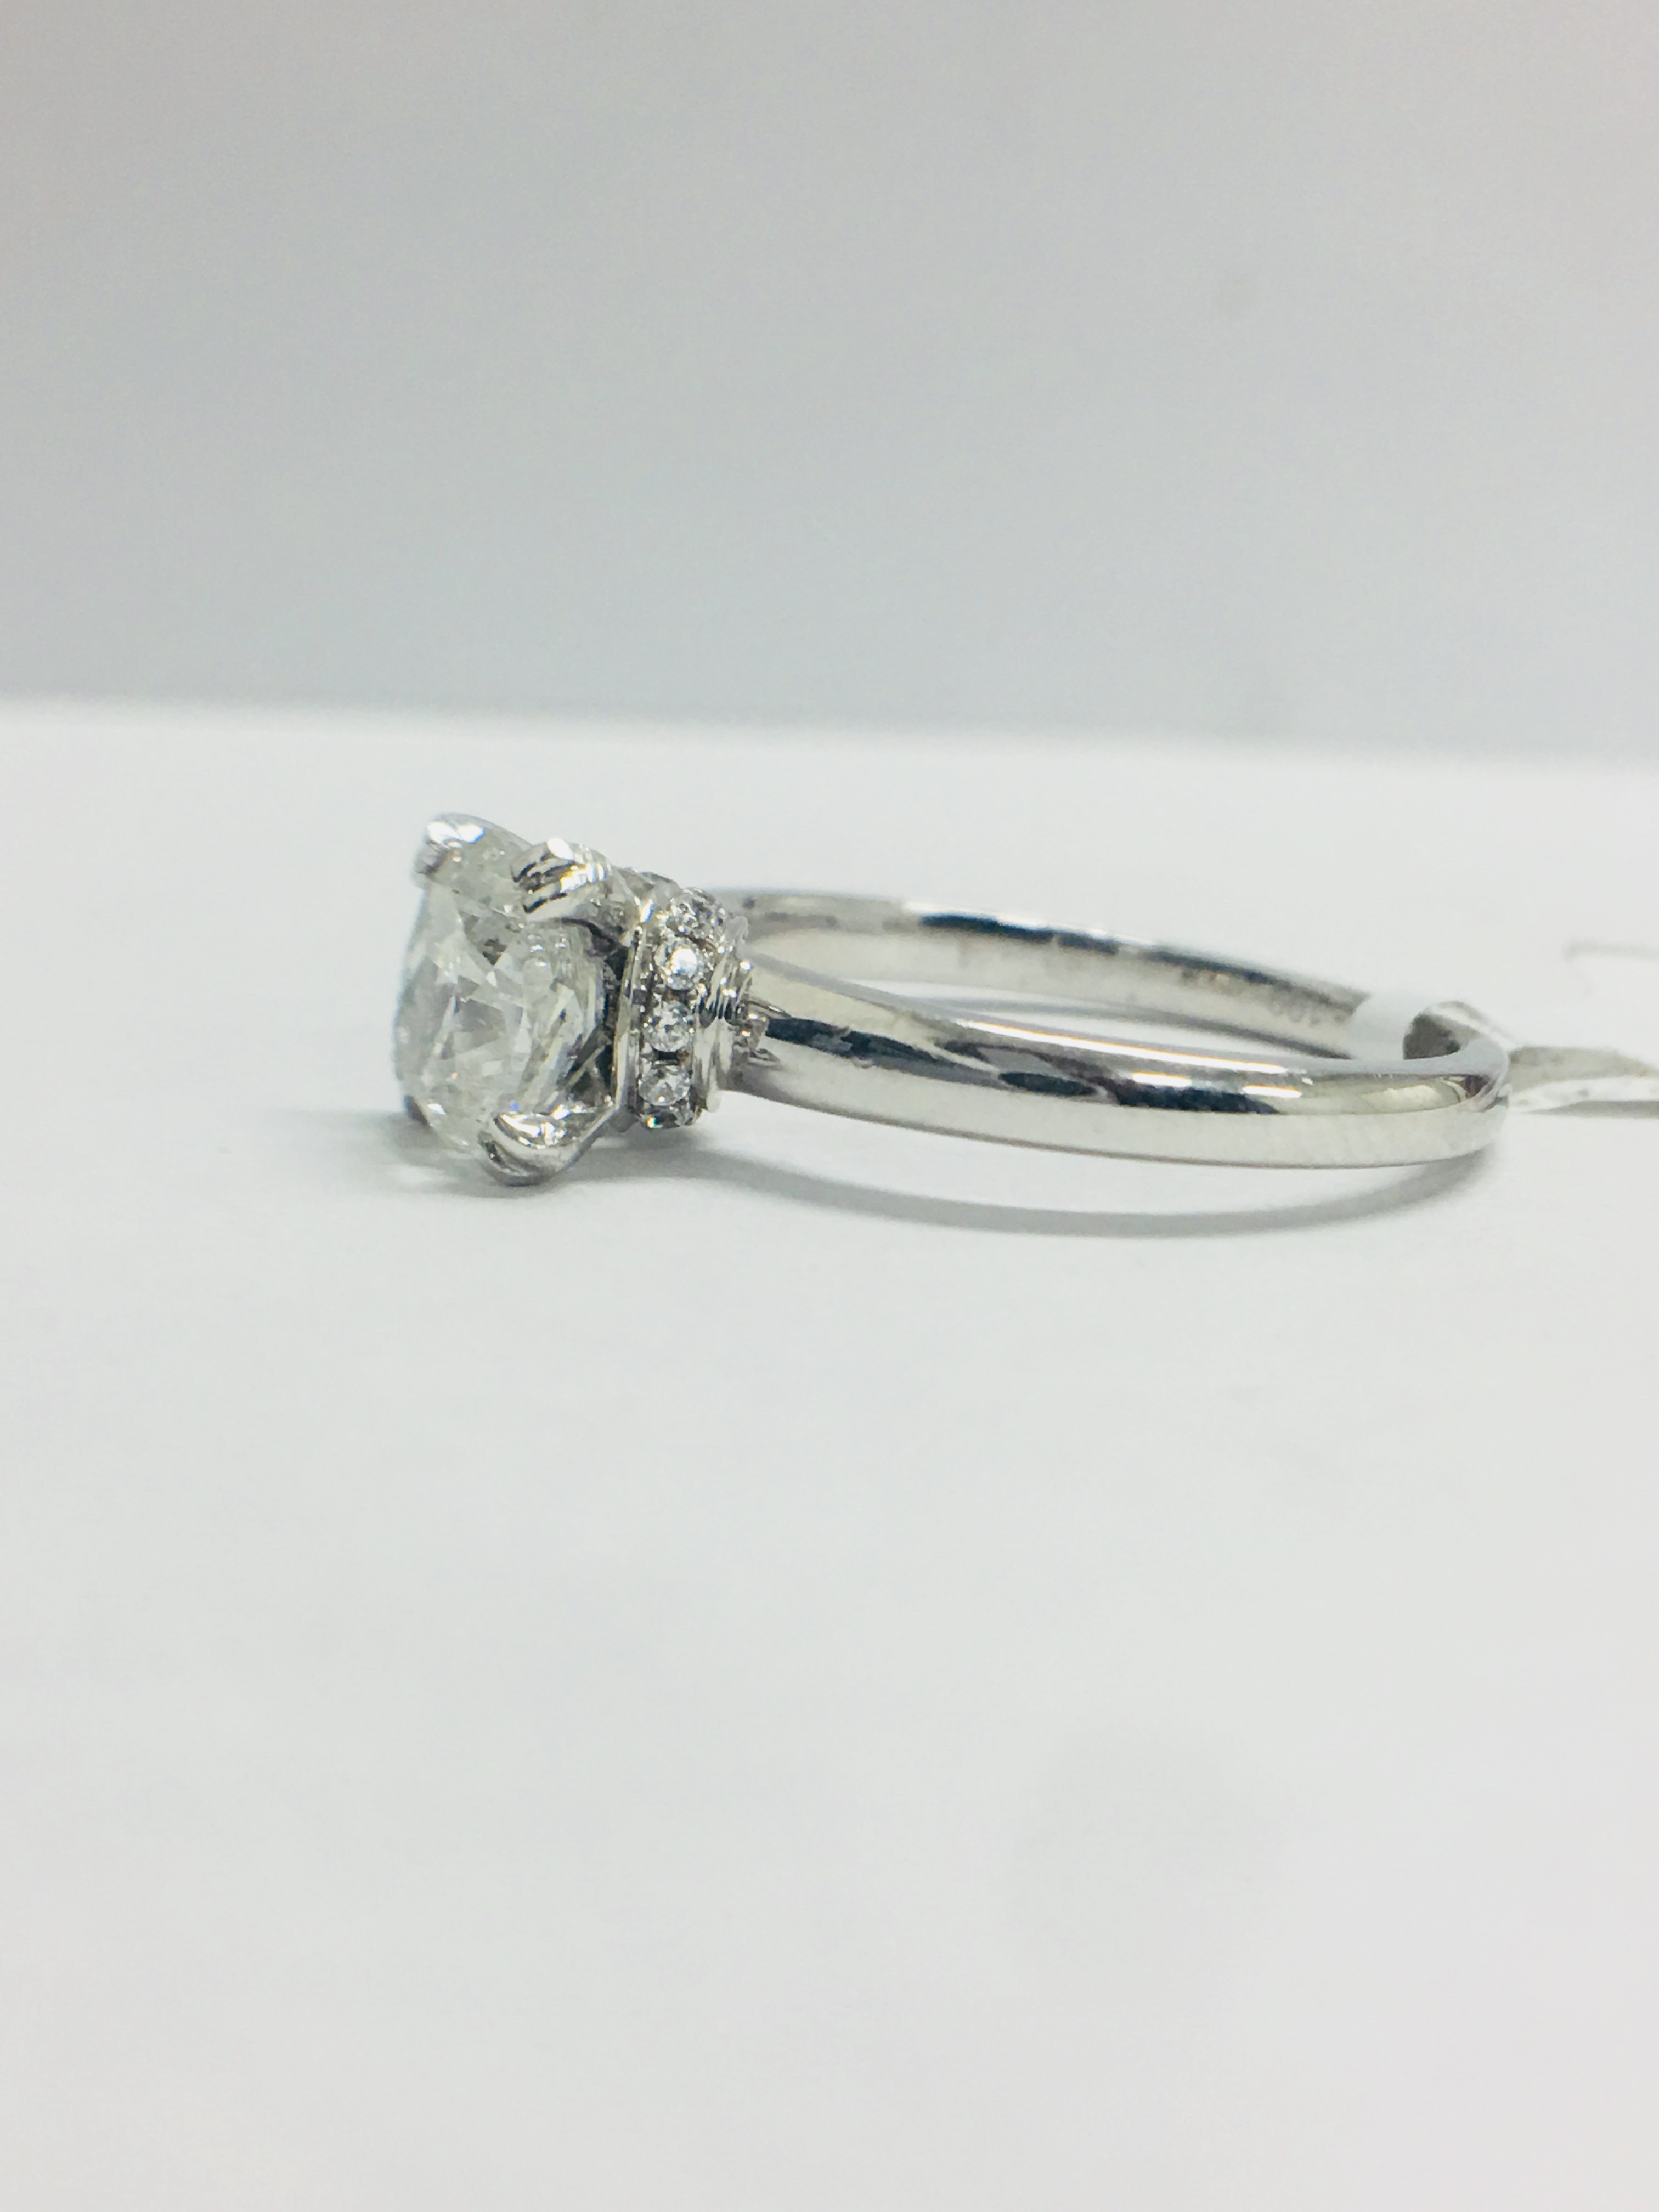 1Ct Cushion Cut Diamond Solitaire Ring In A Diamond Set Mount, - Image 5 of 11